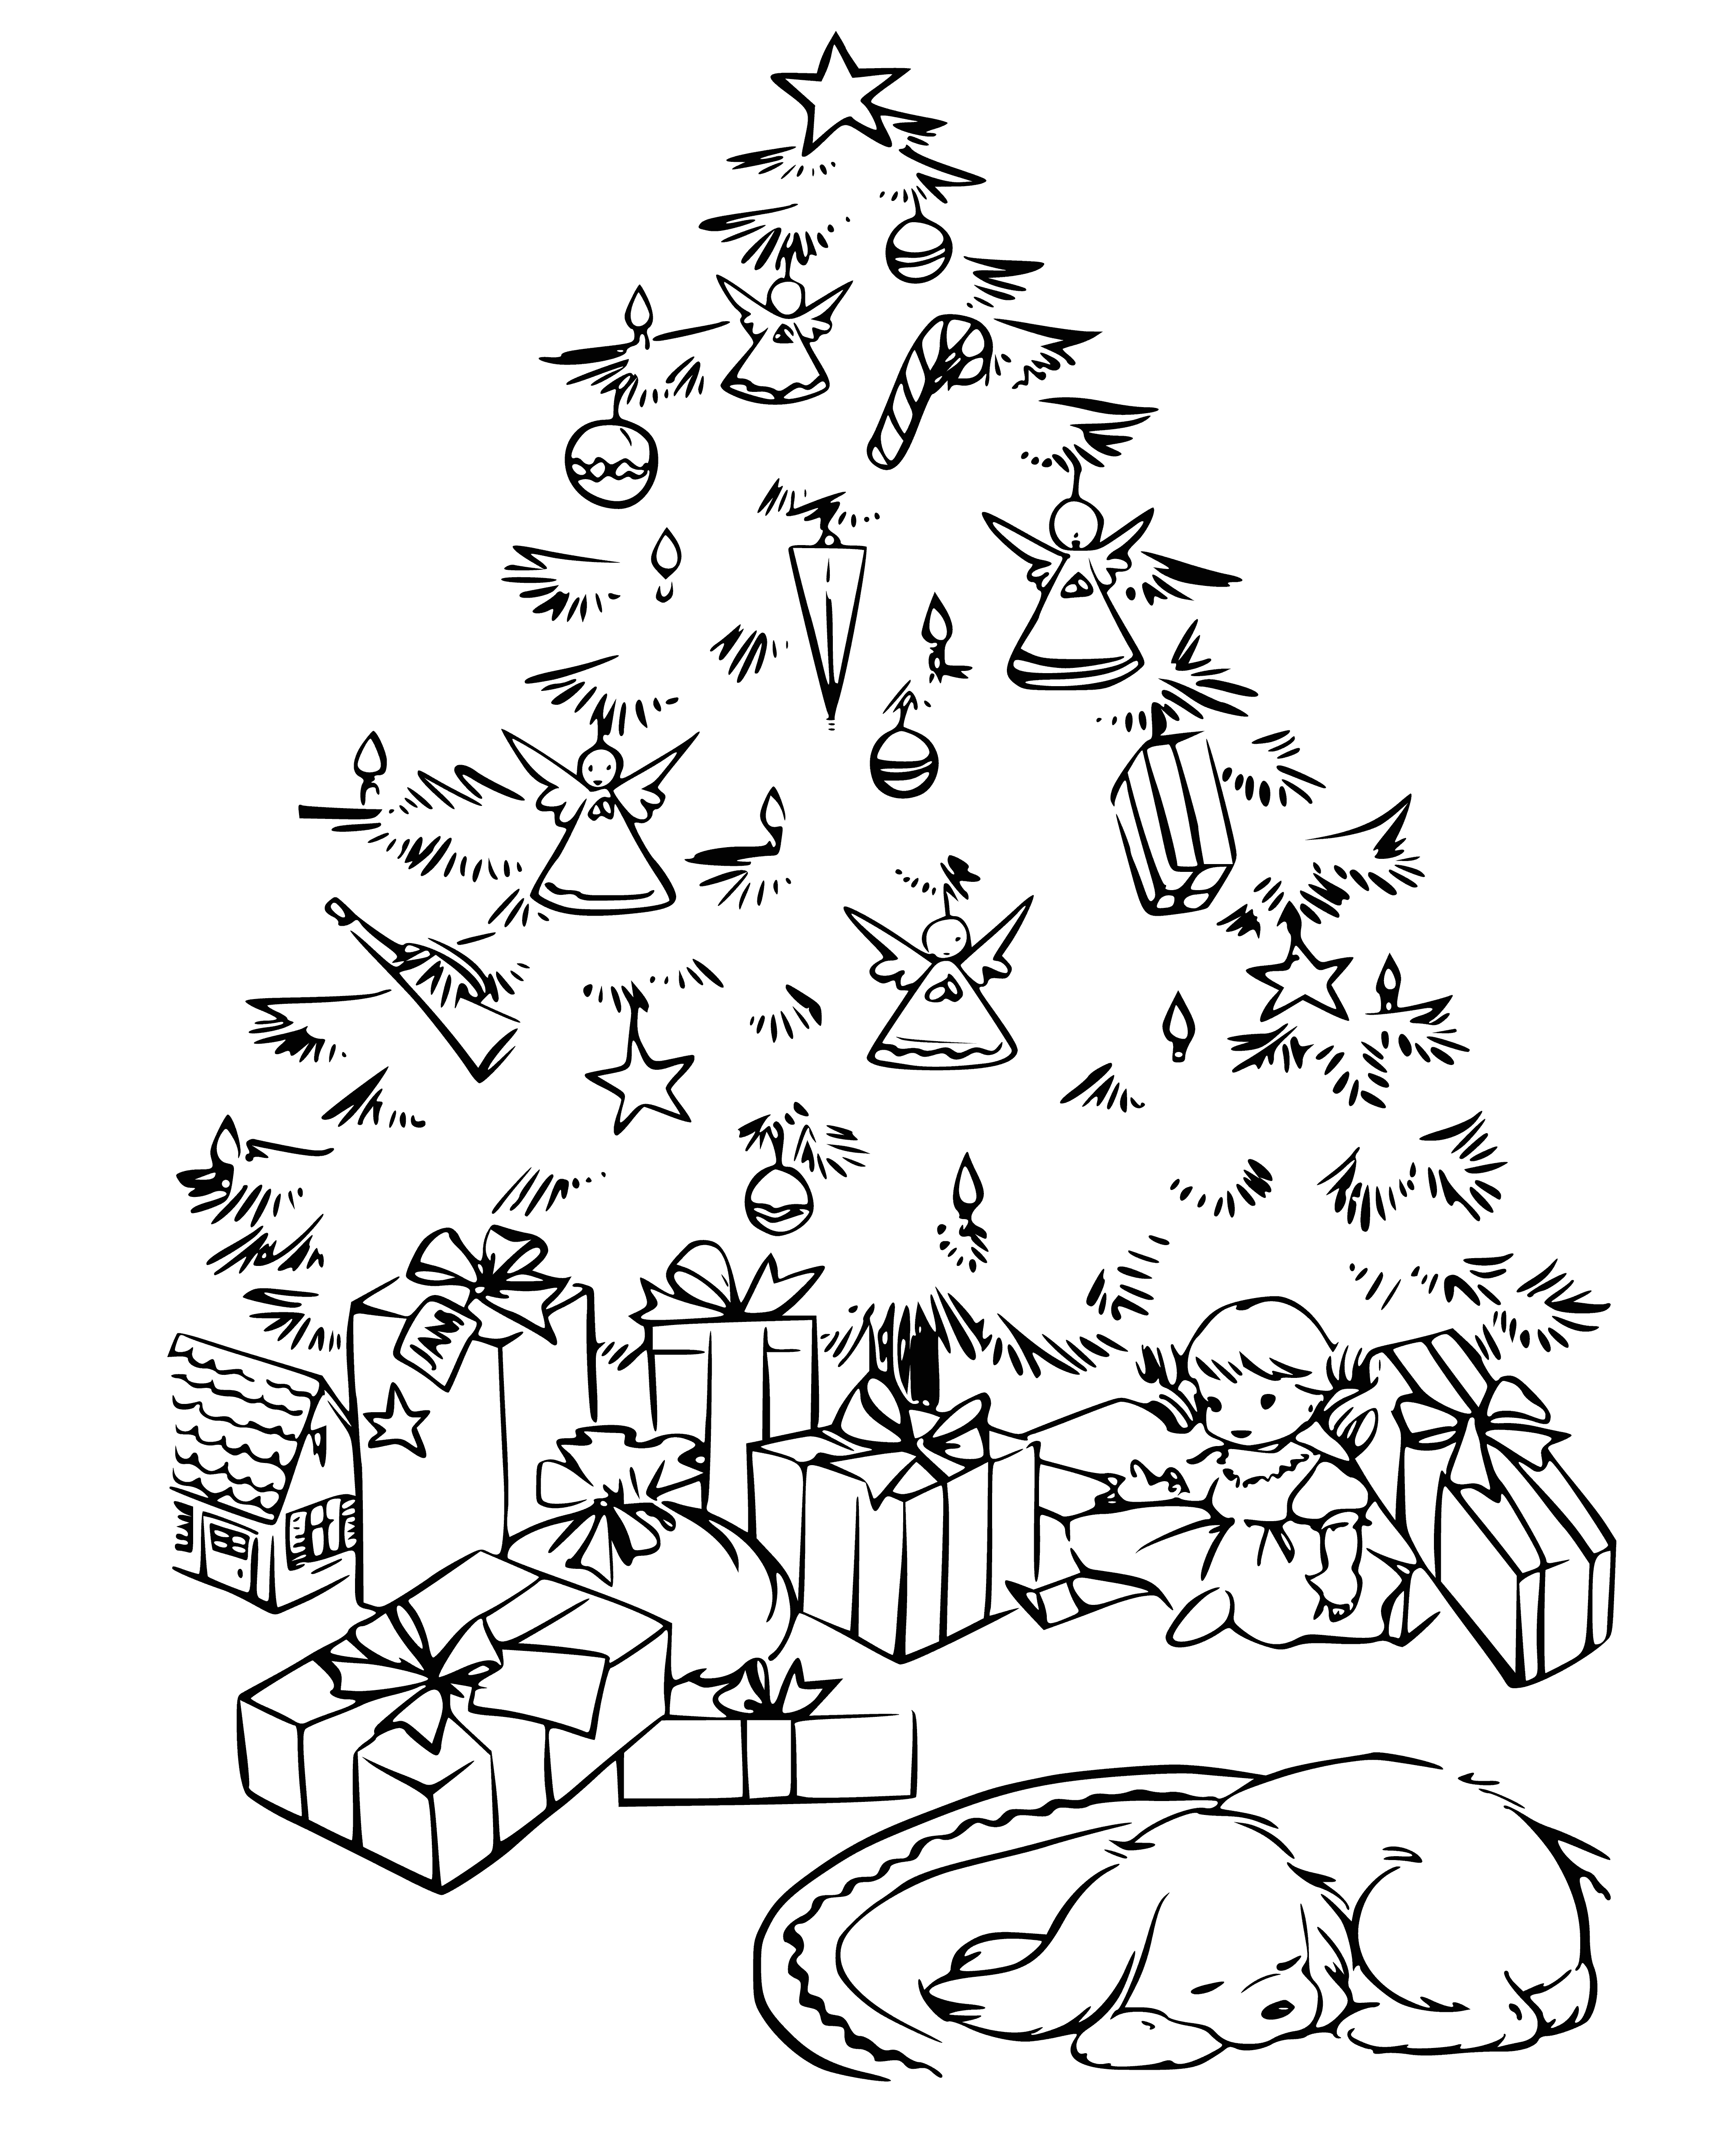 coloring page: An elegant Christmas tree decorated with lights, garlands and shiny balls topped with a star. #ChristmasEve